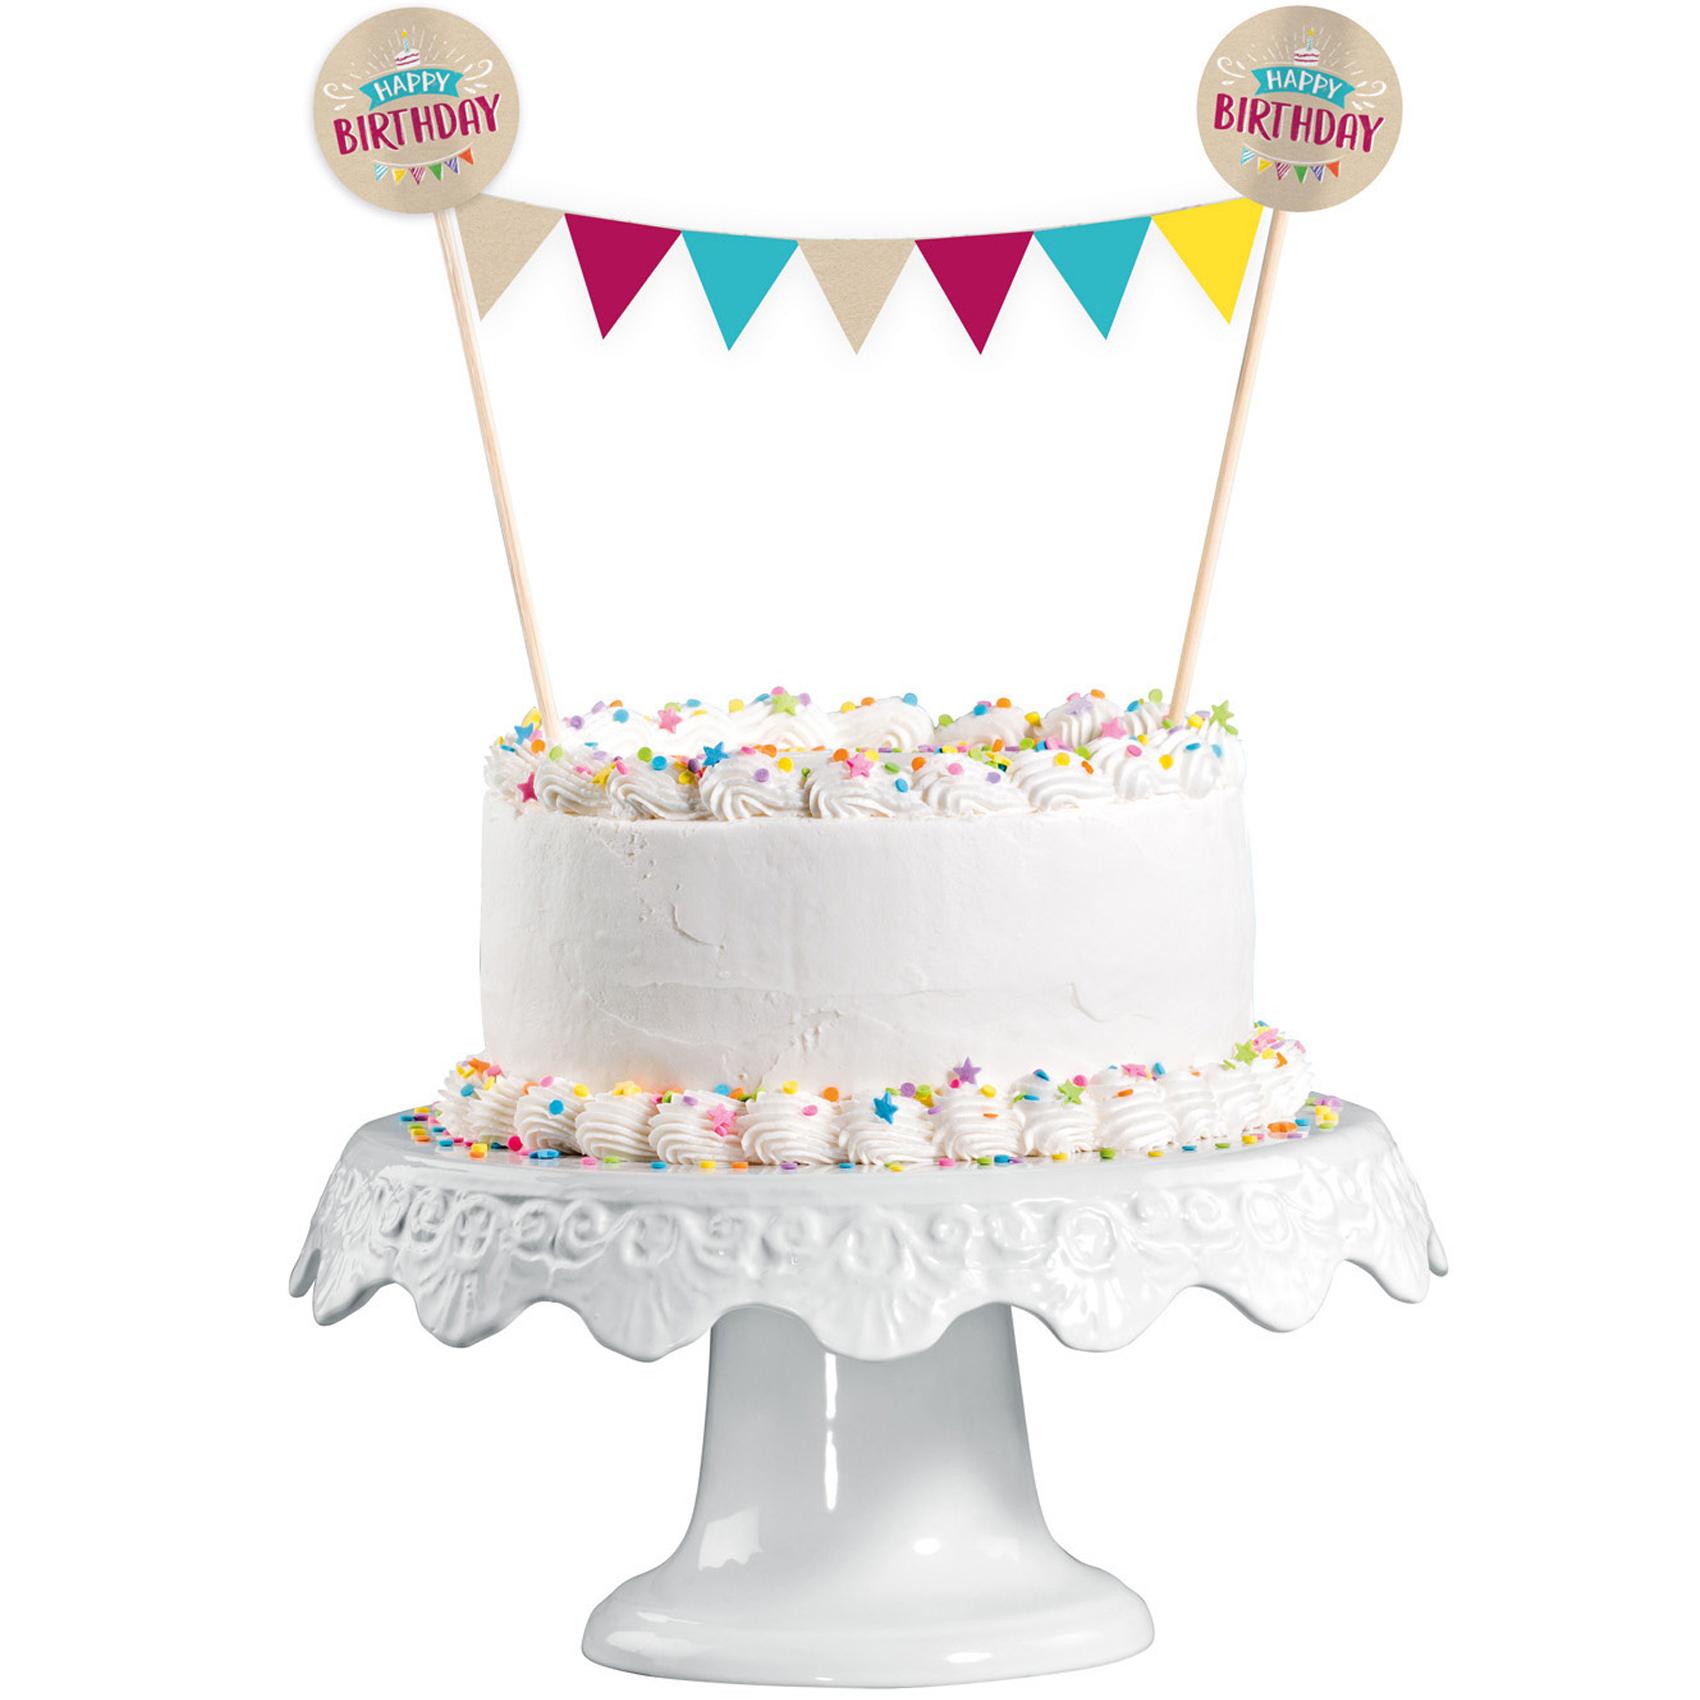 My Birthday Party Cake Bunting Party Accessories - Party Centre